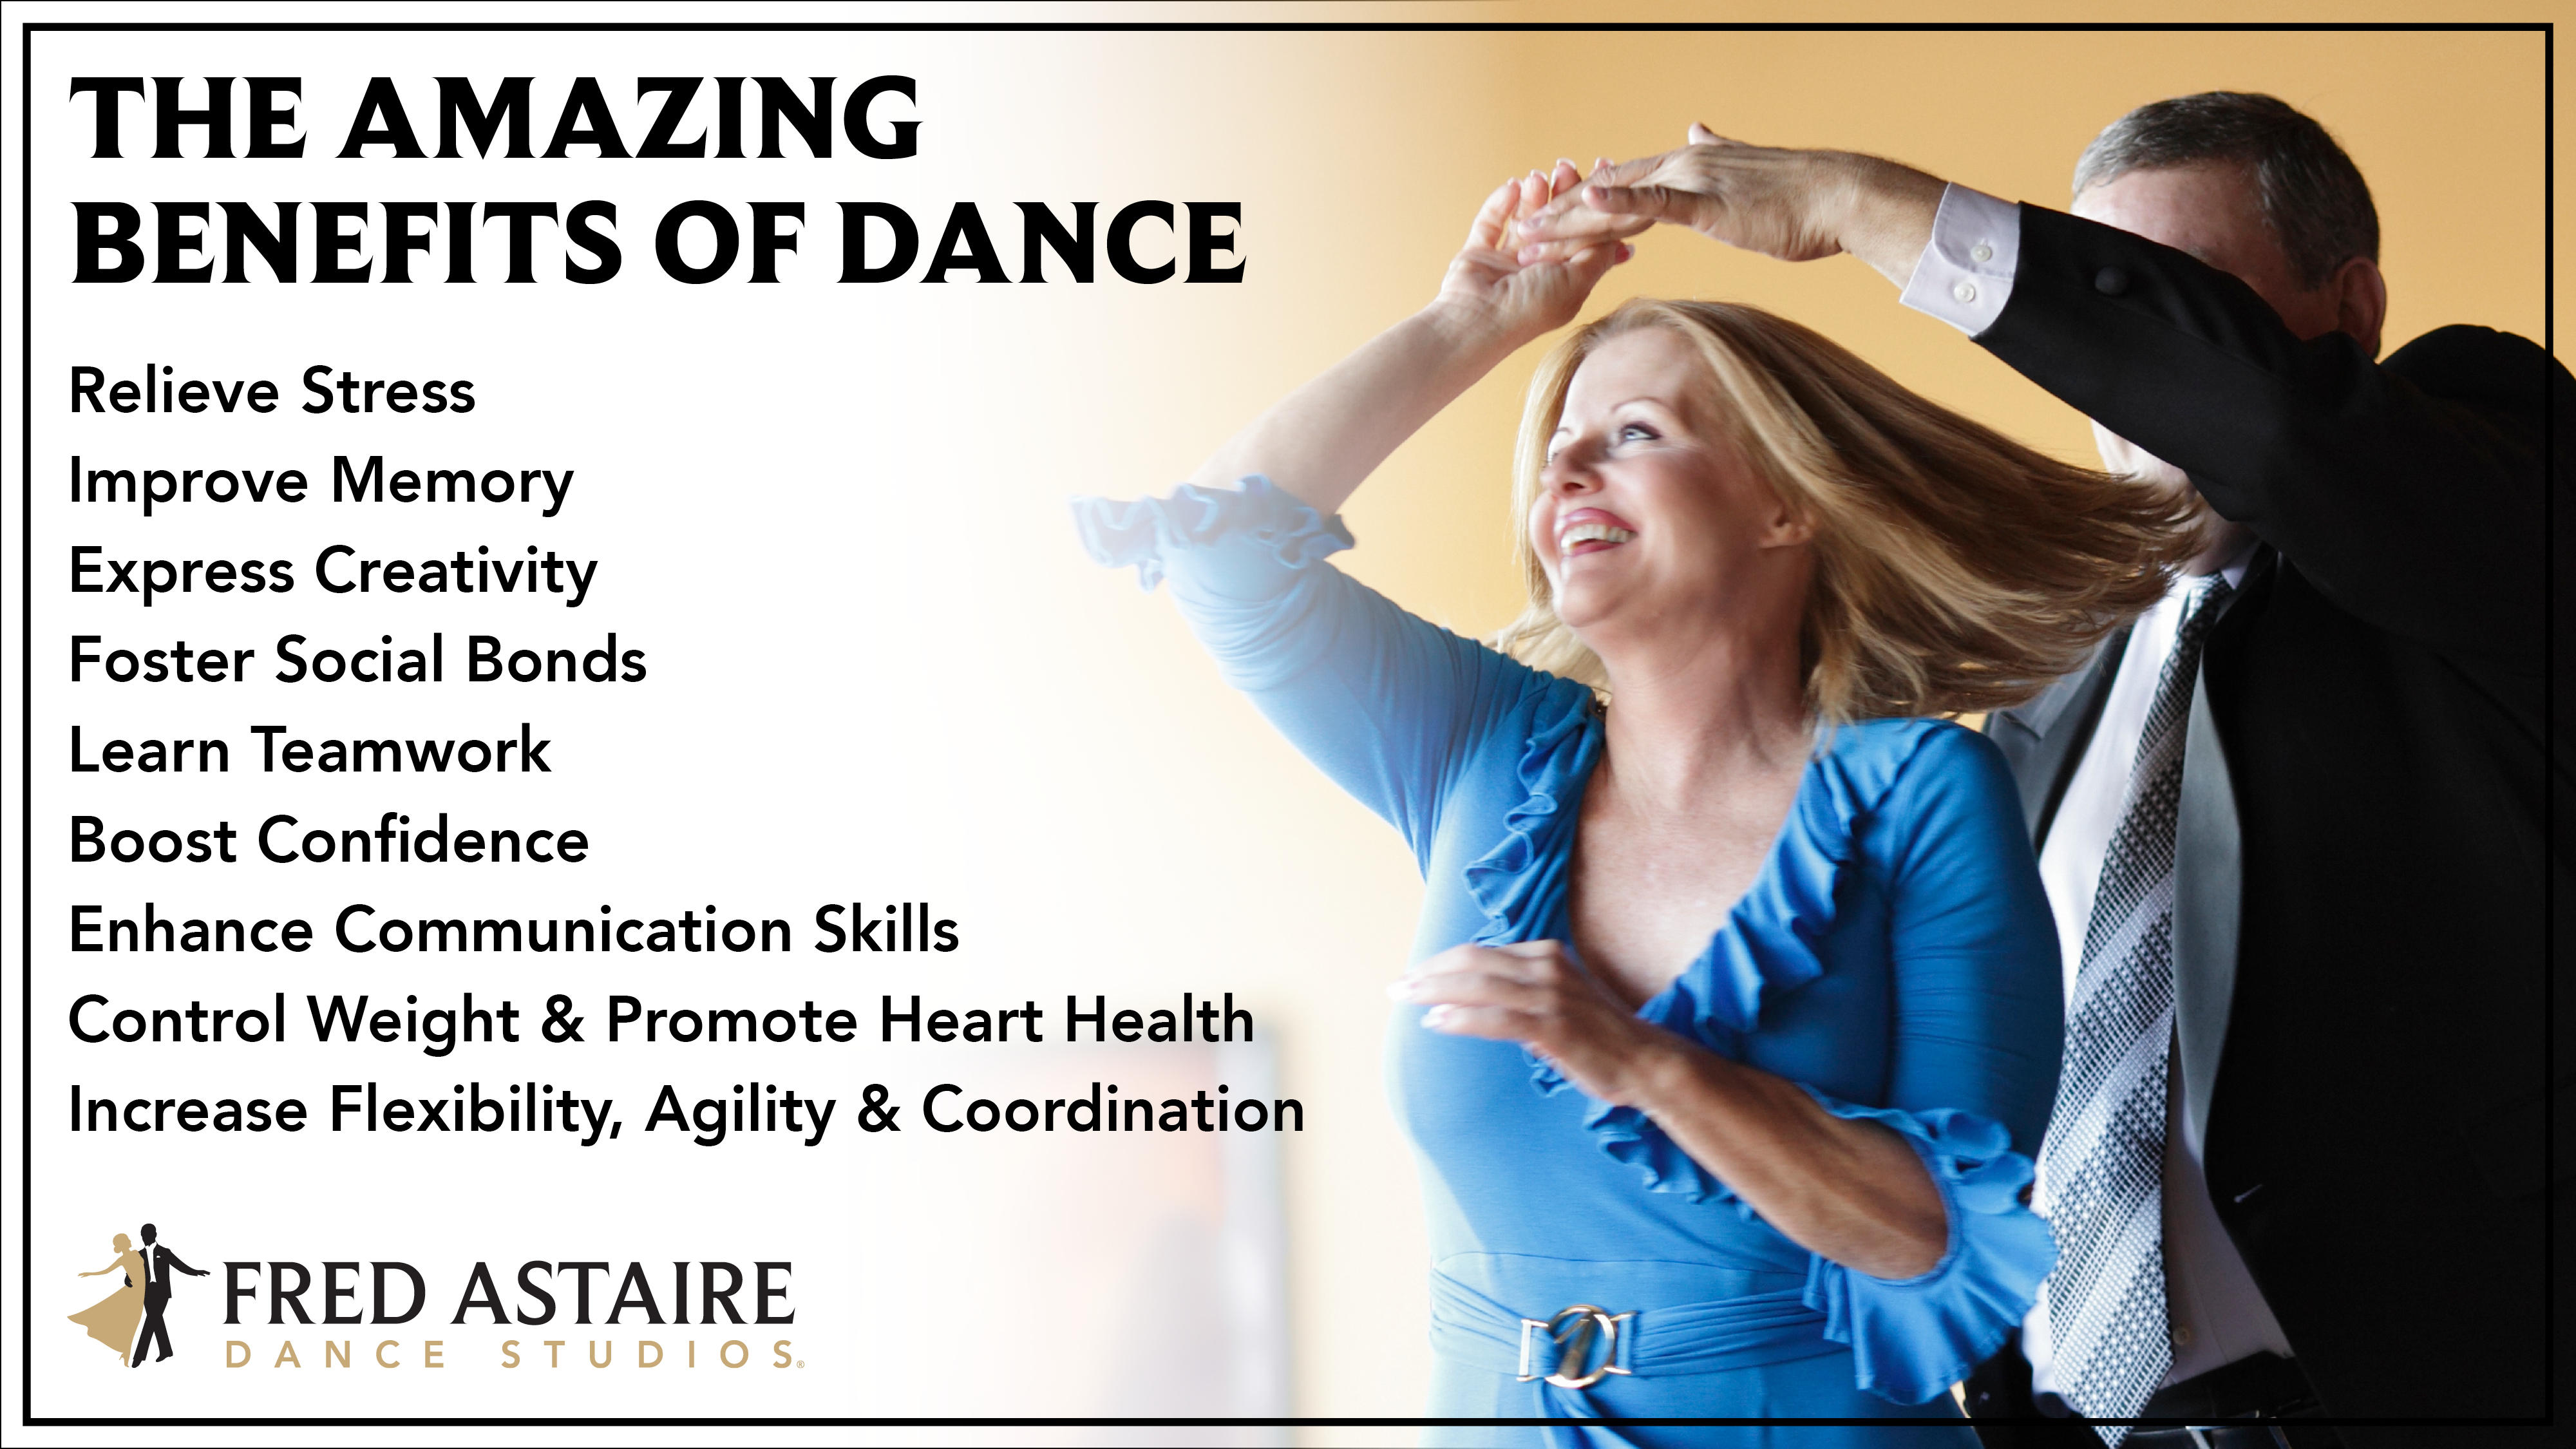 No matter if dancing by yourself, or with a Partner, the Fred Astaire Dance Studios - Riverside is the place for you to learn! We teach in Private Dance Lessons, Group Dance Lessons and of course we have Parties for you to practice at! Call today to learn more! 401-415-9766